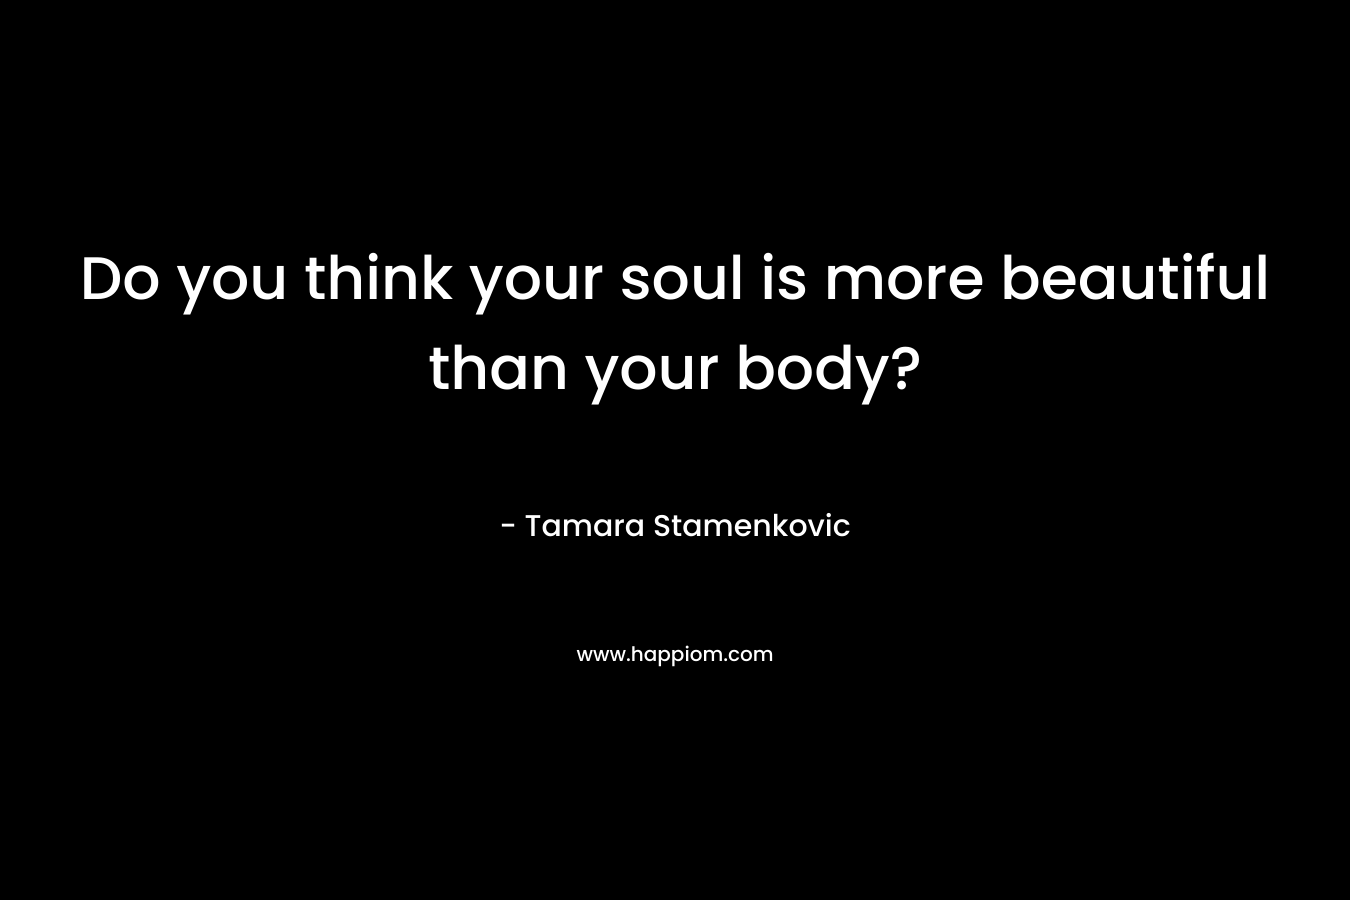 Do you think your soul is more beautiful than your body?